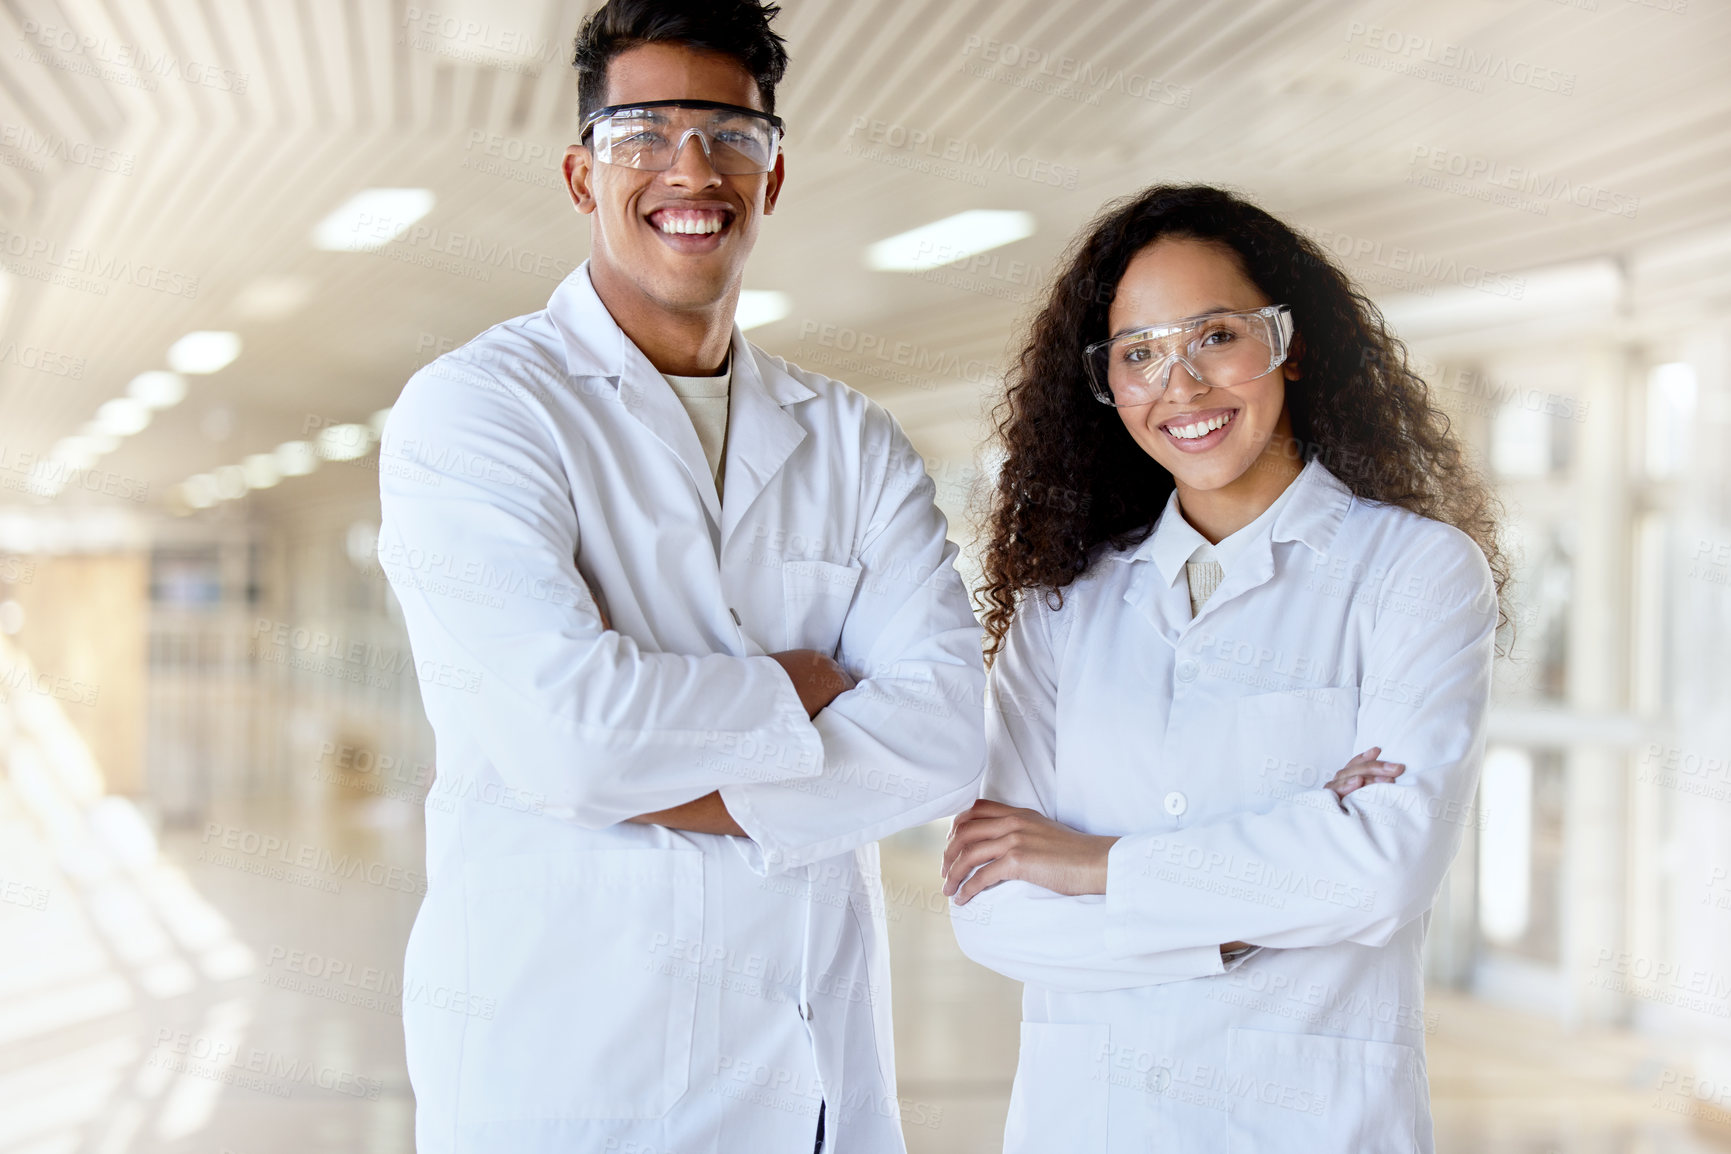 Buy stock photo Cropped portrait of two young science students standing with their arms folded in a campus hallway